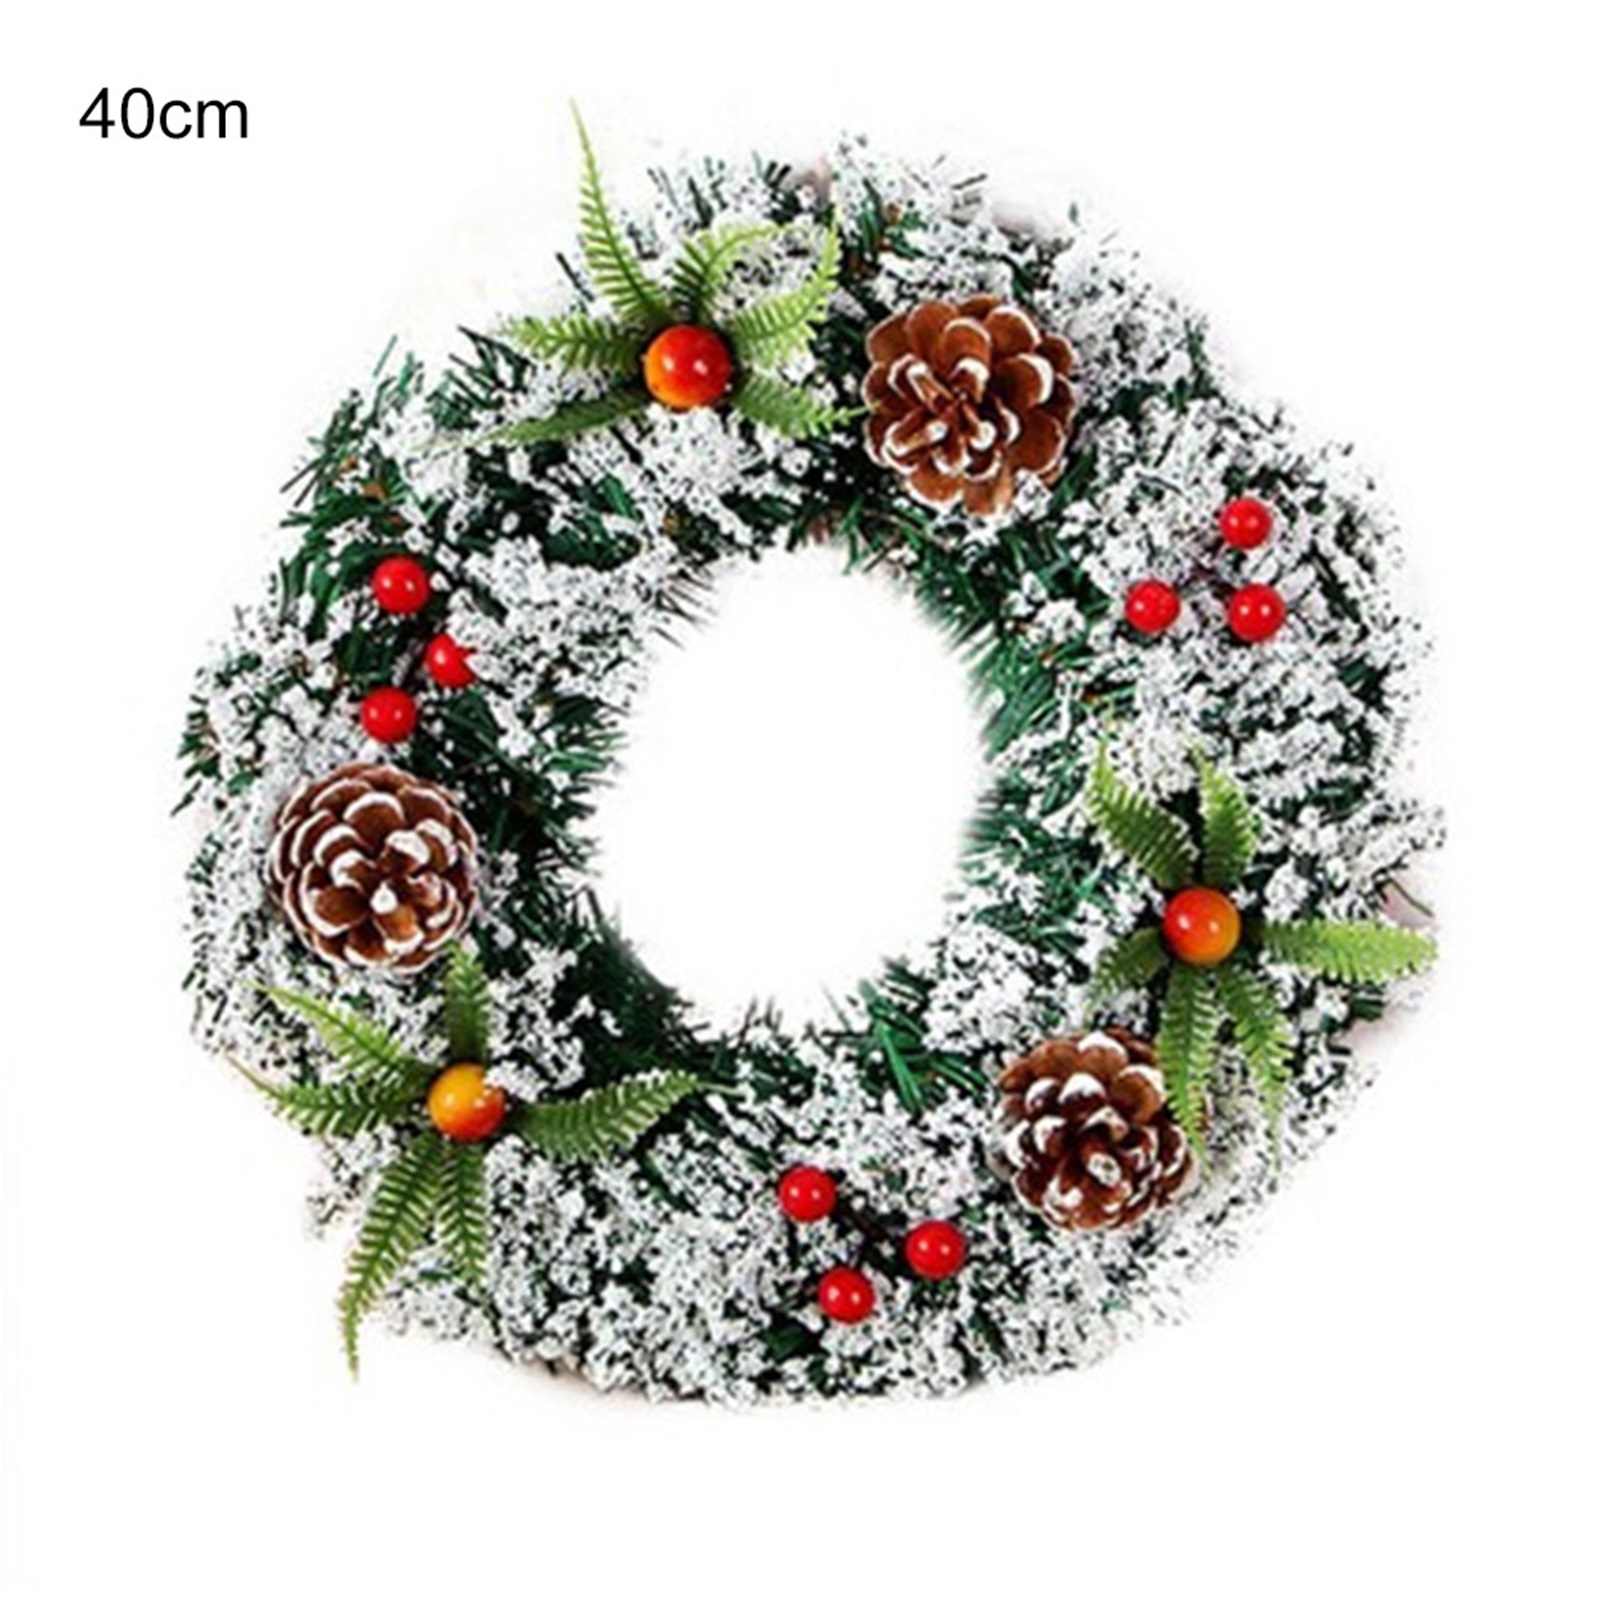 Chirpa Chirstmas Decorations Wall Hanging Christmas Wreath Decoration for Xmas Party Door Garland Ornament